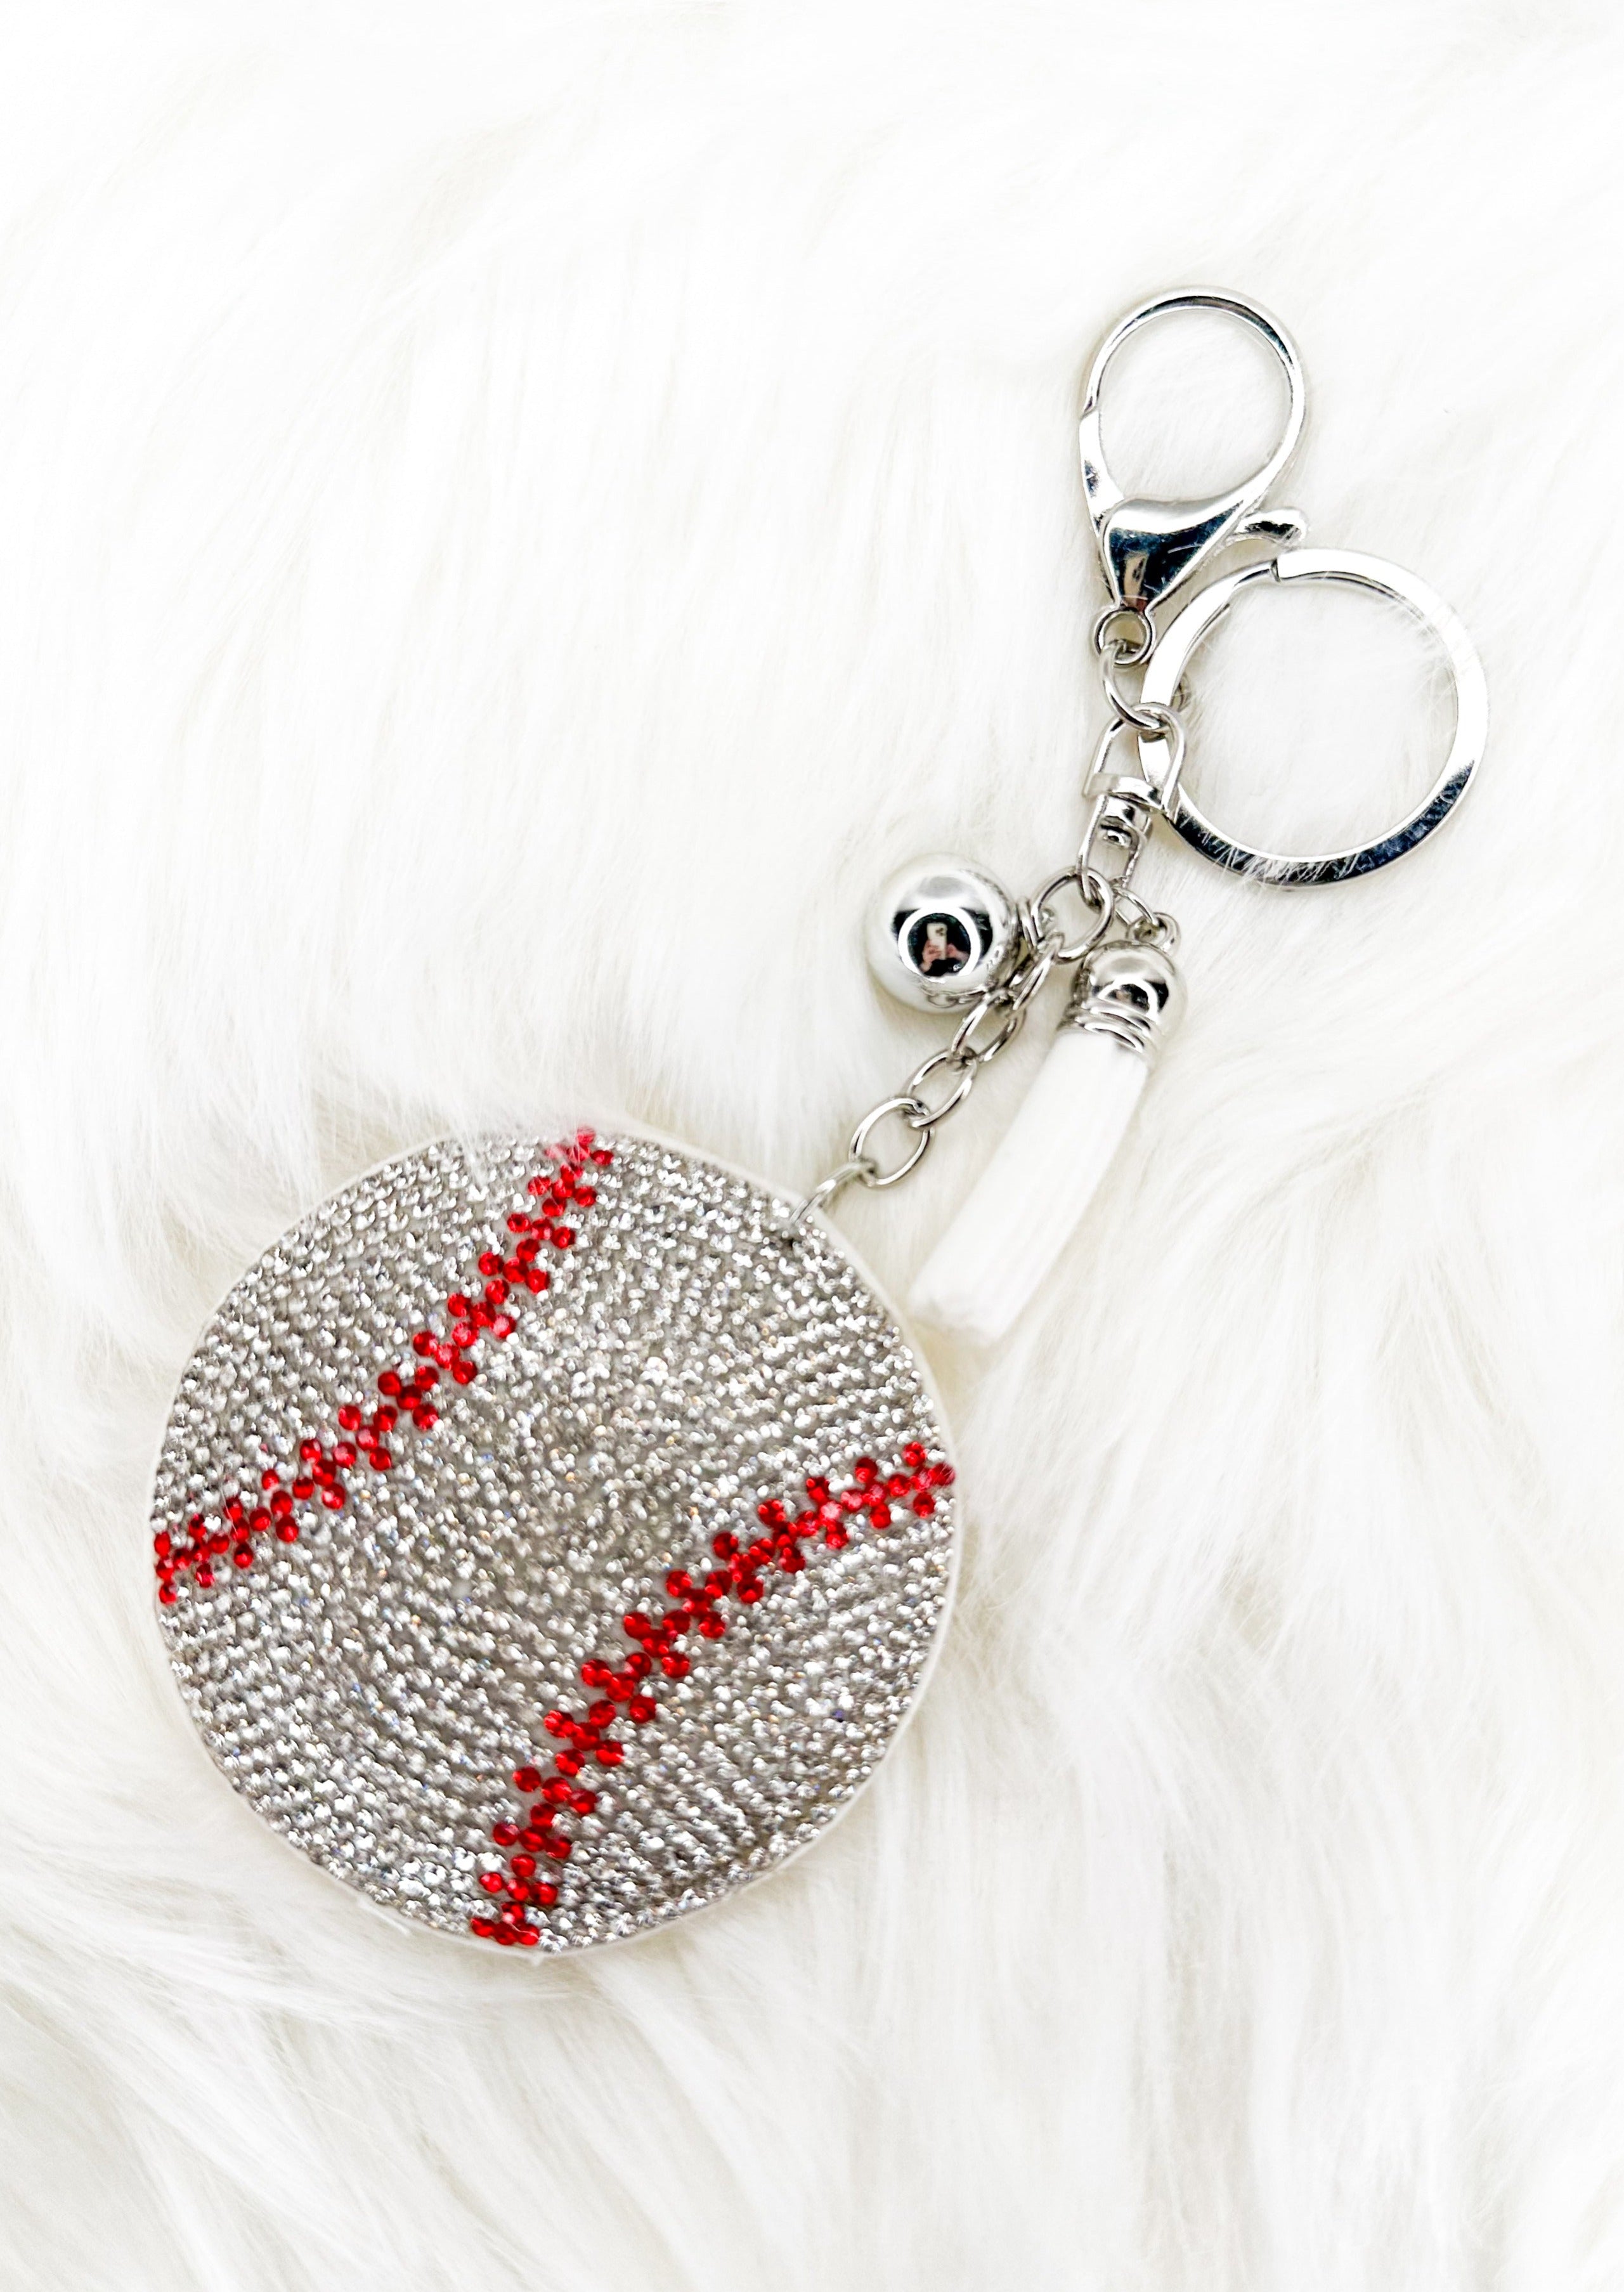 Baseball sparkly keychain with white tassel and silver hardware.